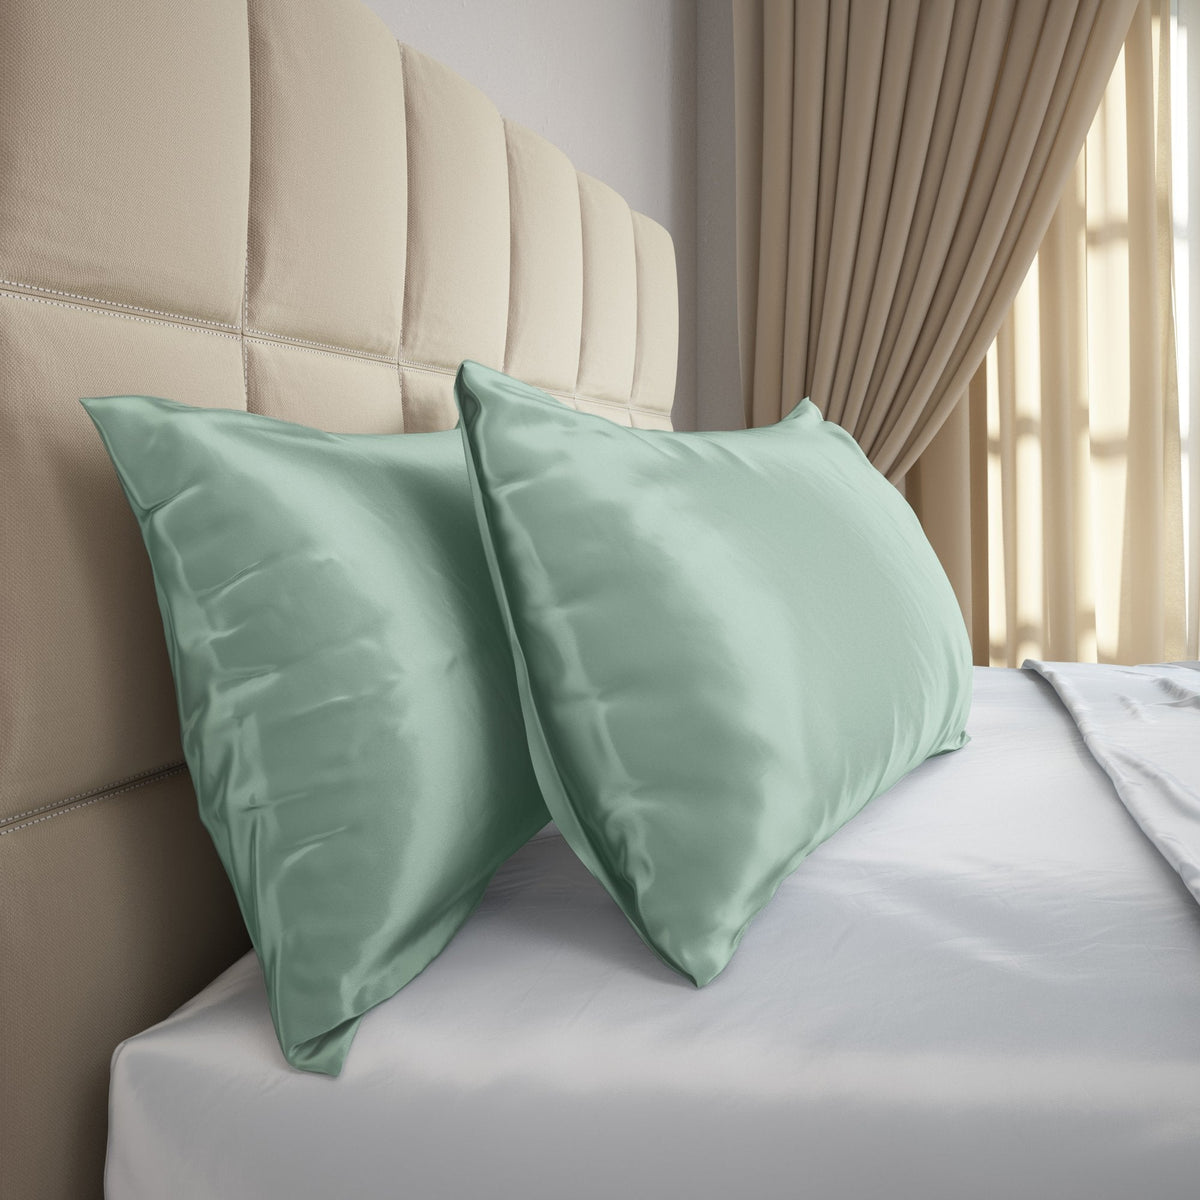 Mulberry Park Silks 19 Momme Pillowcase Green Bed- Side